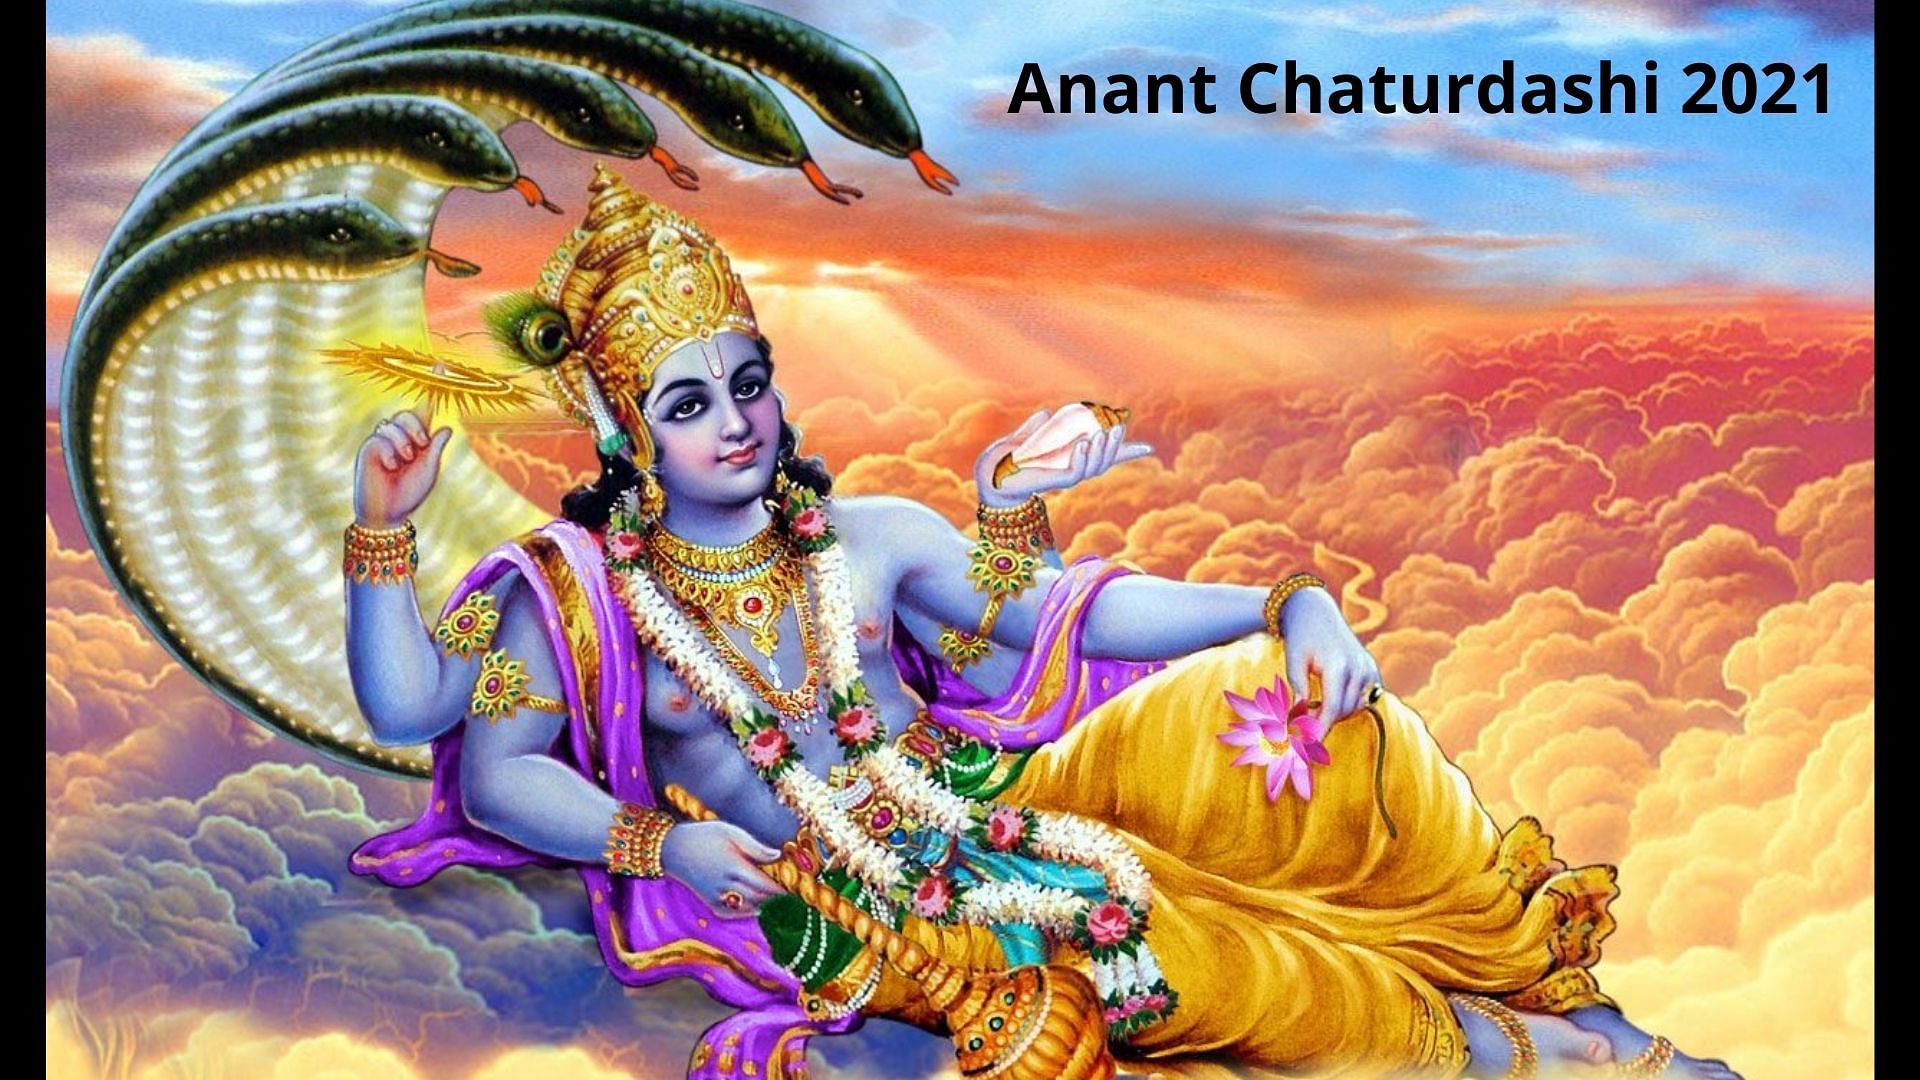 Anant chaturdashi 2021 : Know about the occasion and it's significance